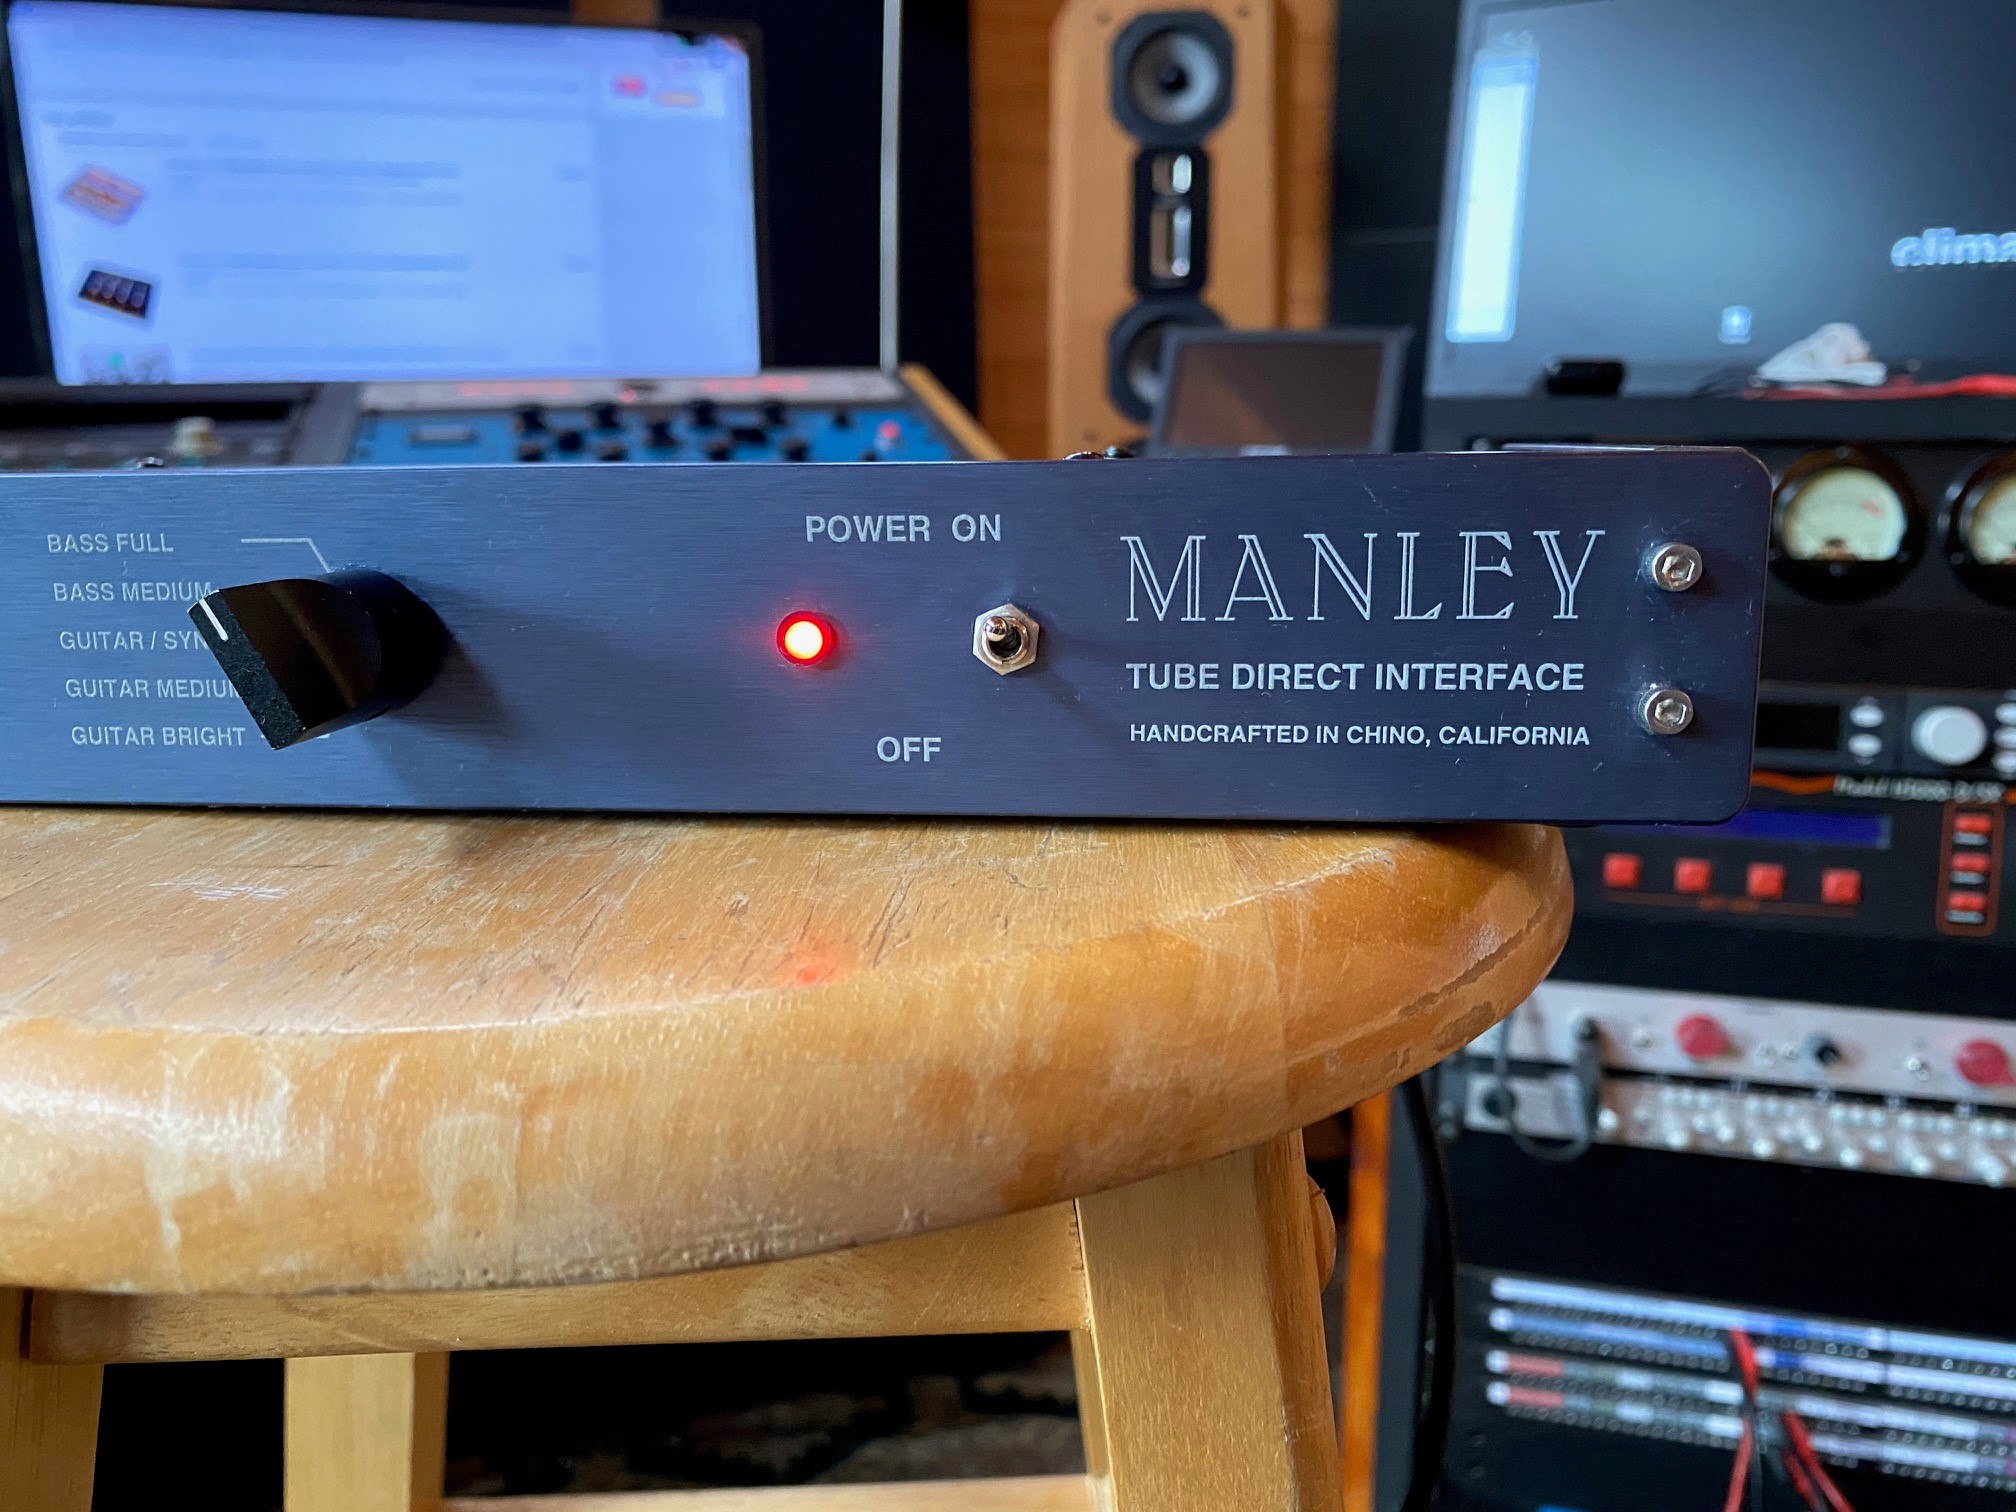 Tube Direct Interface - Manley Labs Tube Direct Interface 